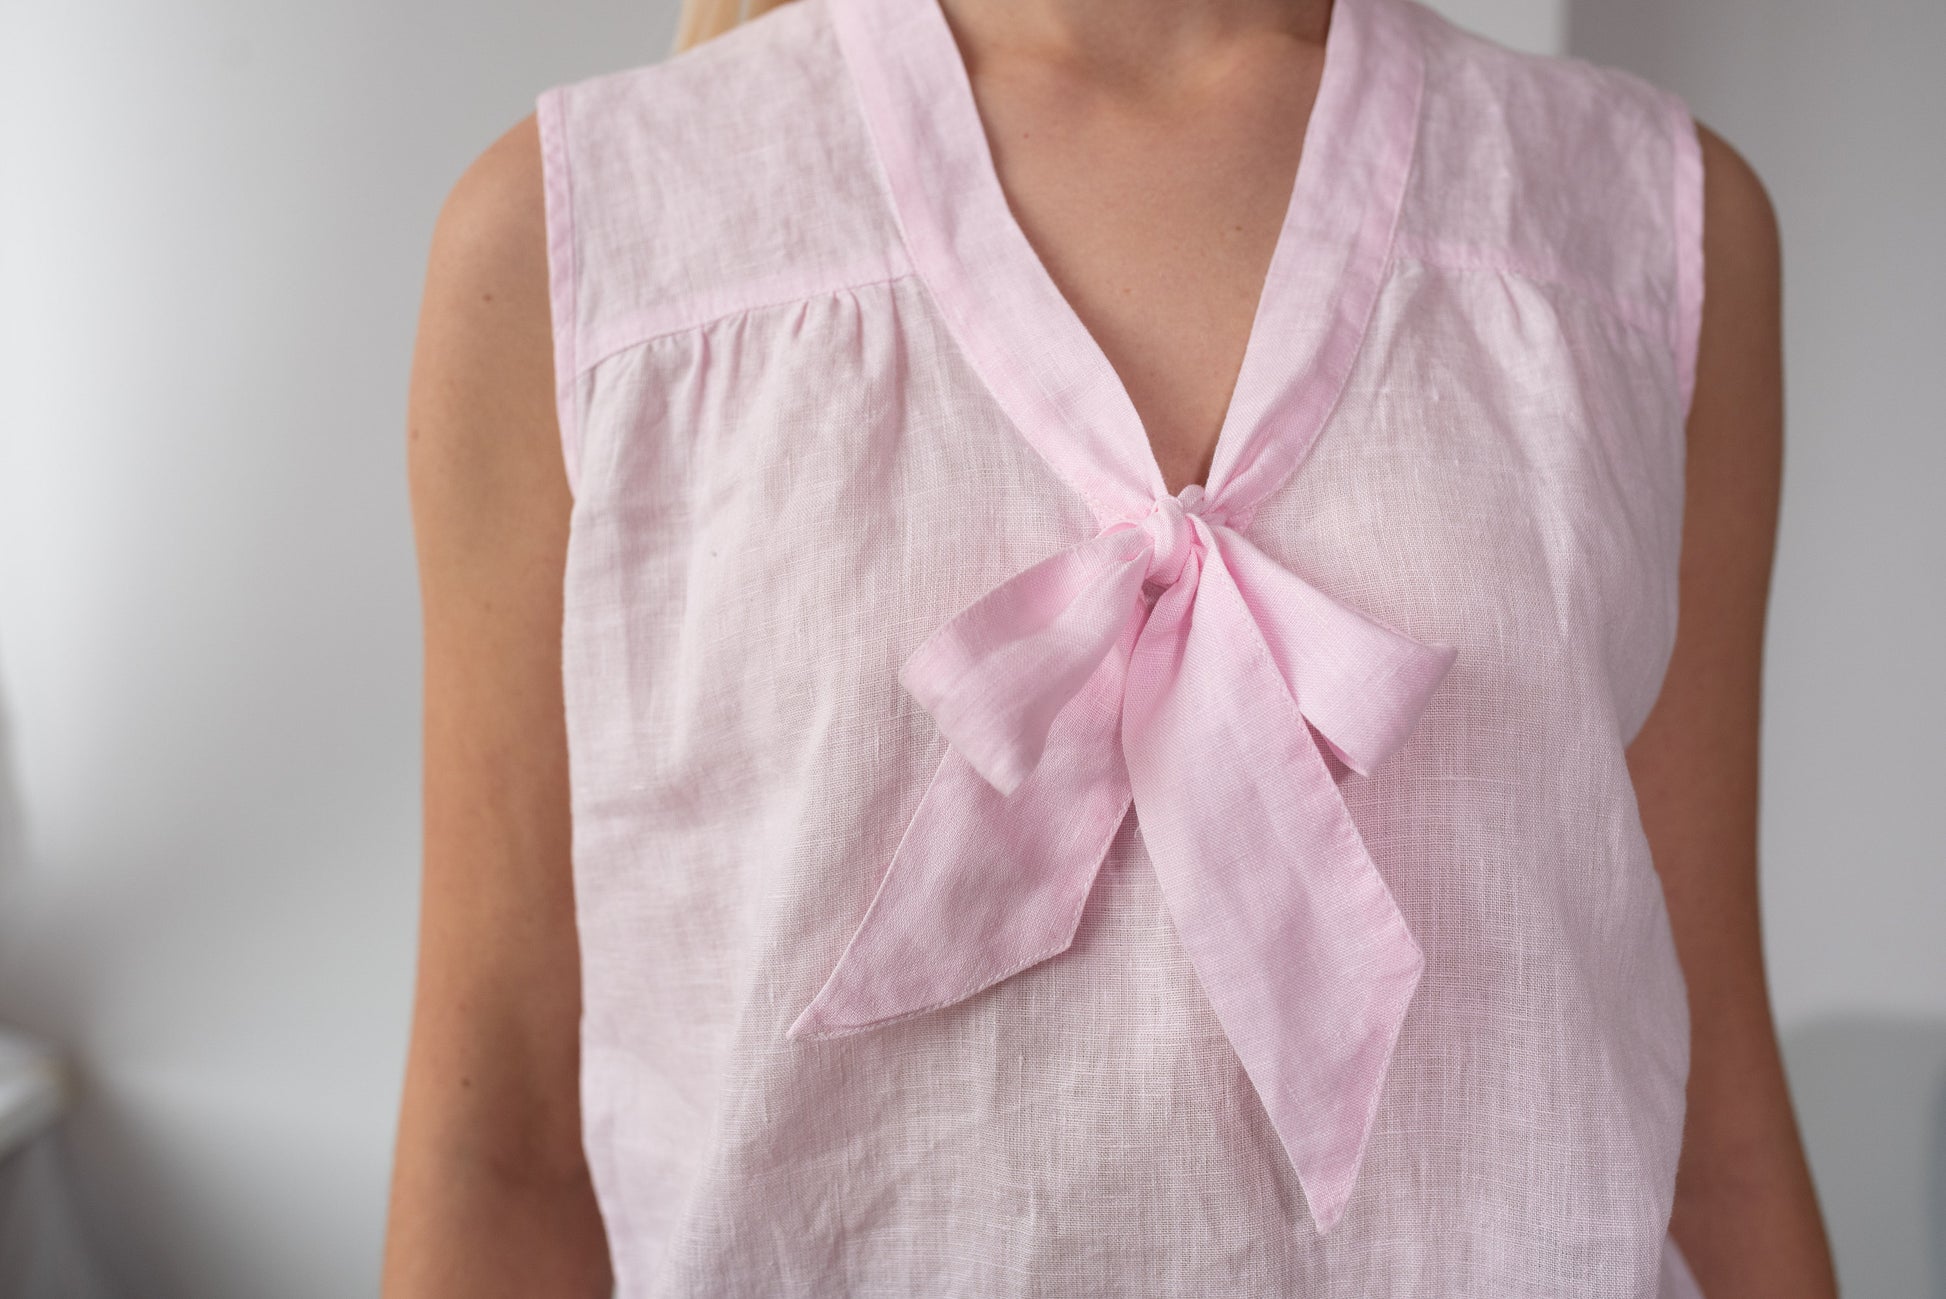 Linen Blouse JULIA Sleeveless With Front Bow